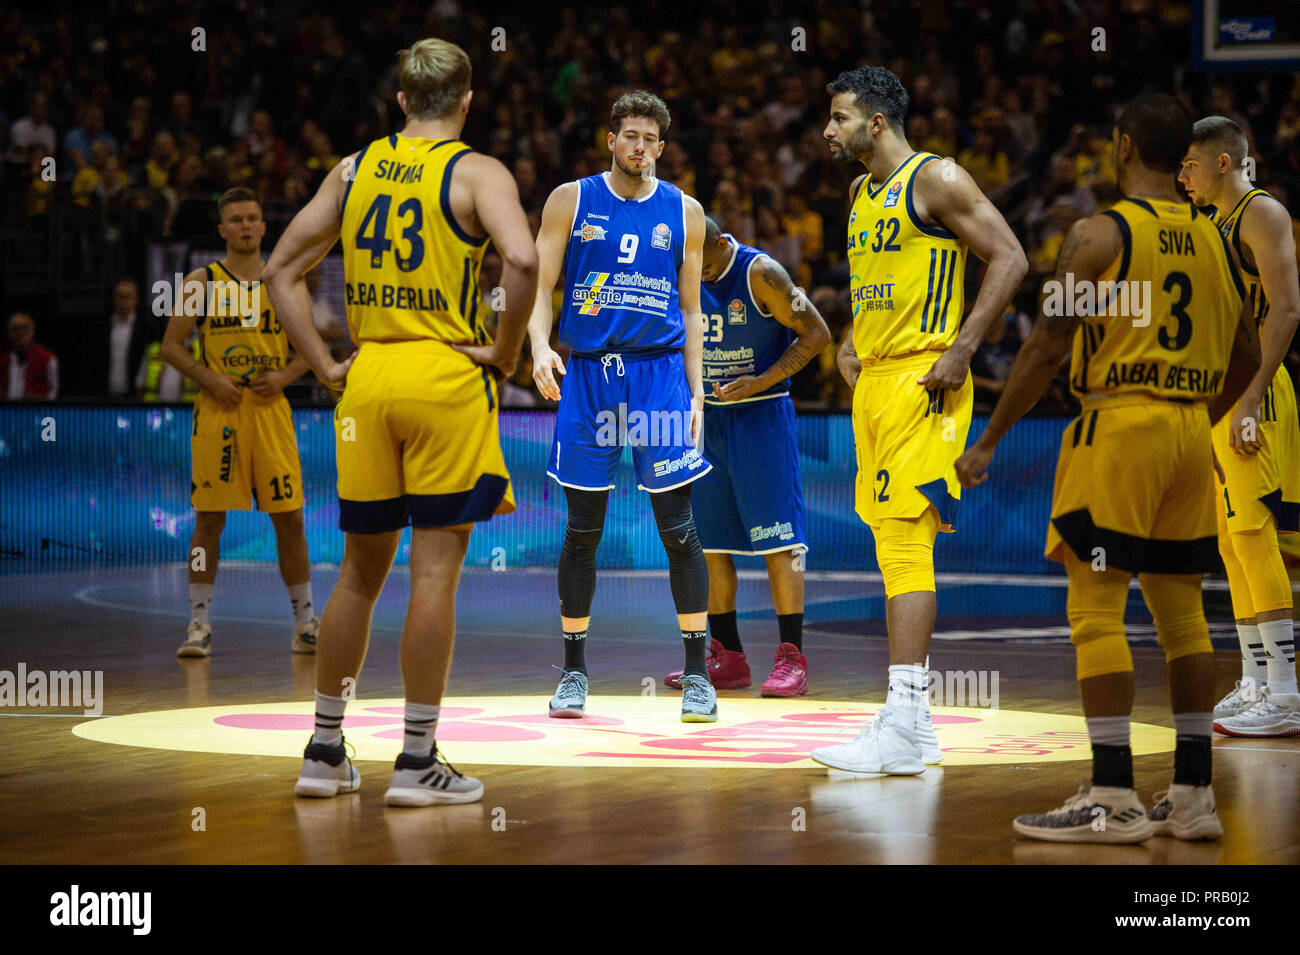 29 September 2018, Berlin: Basketball: Bundesliga, ALBA Berlin - Science  City Jena, main round, 1st matchday of the season 2018/19 in the  Mercedes-Benz Arena. Players face each other before the game kicks